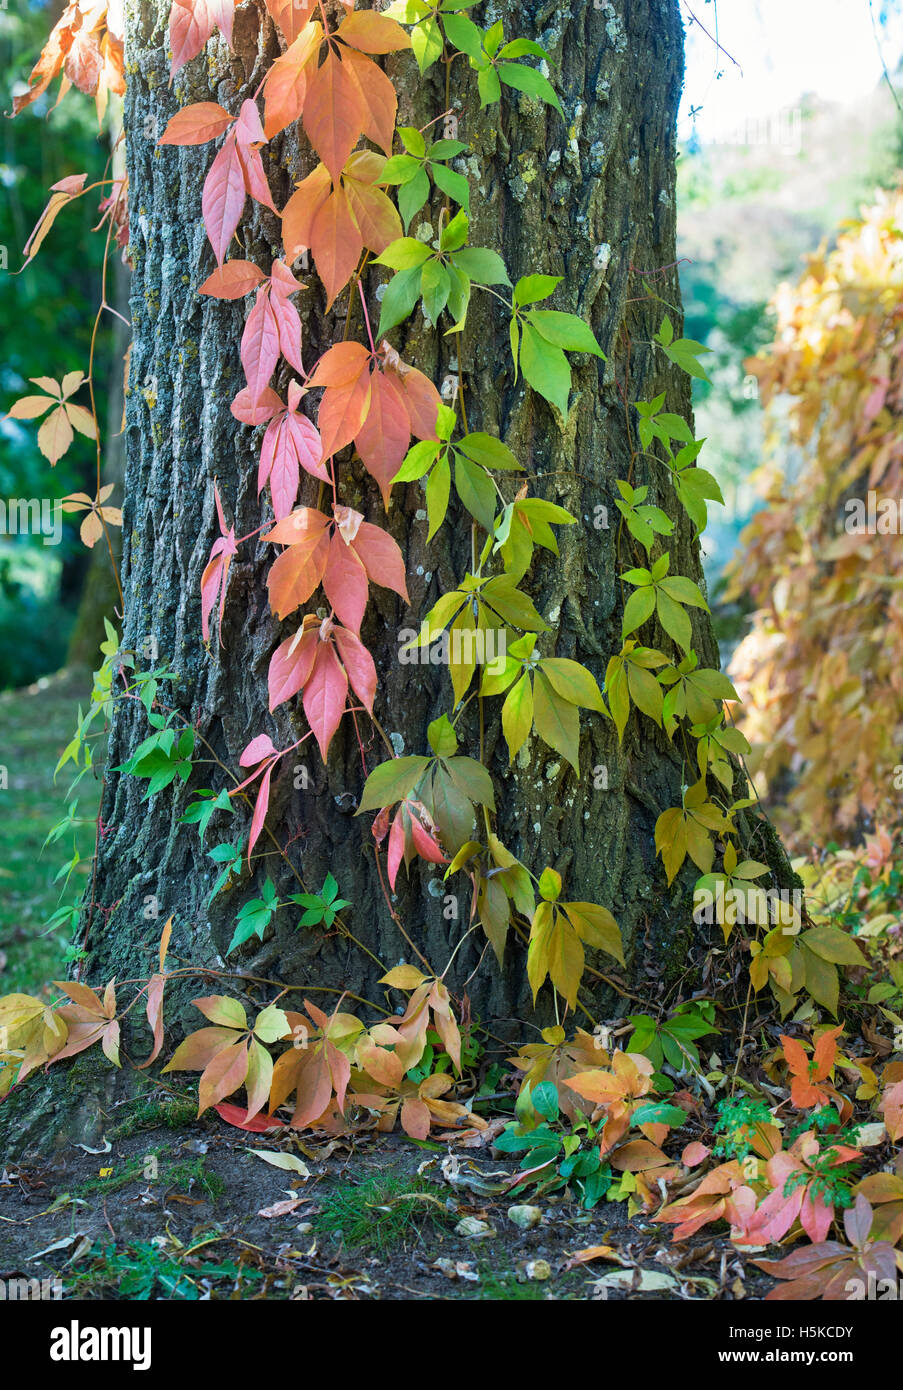 Parthenocissus quinquefolia. Virginia Creeper / American ivy in autumn growing up a tree trunk. Cotswolds, England Stock Photo